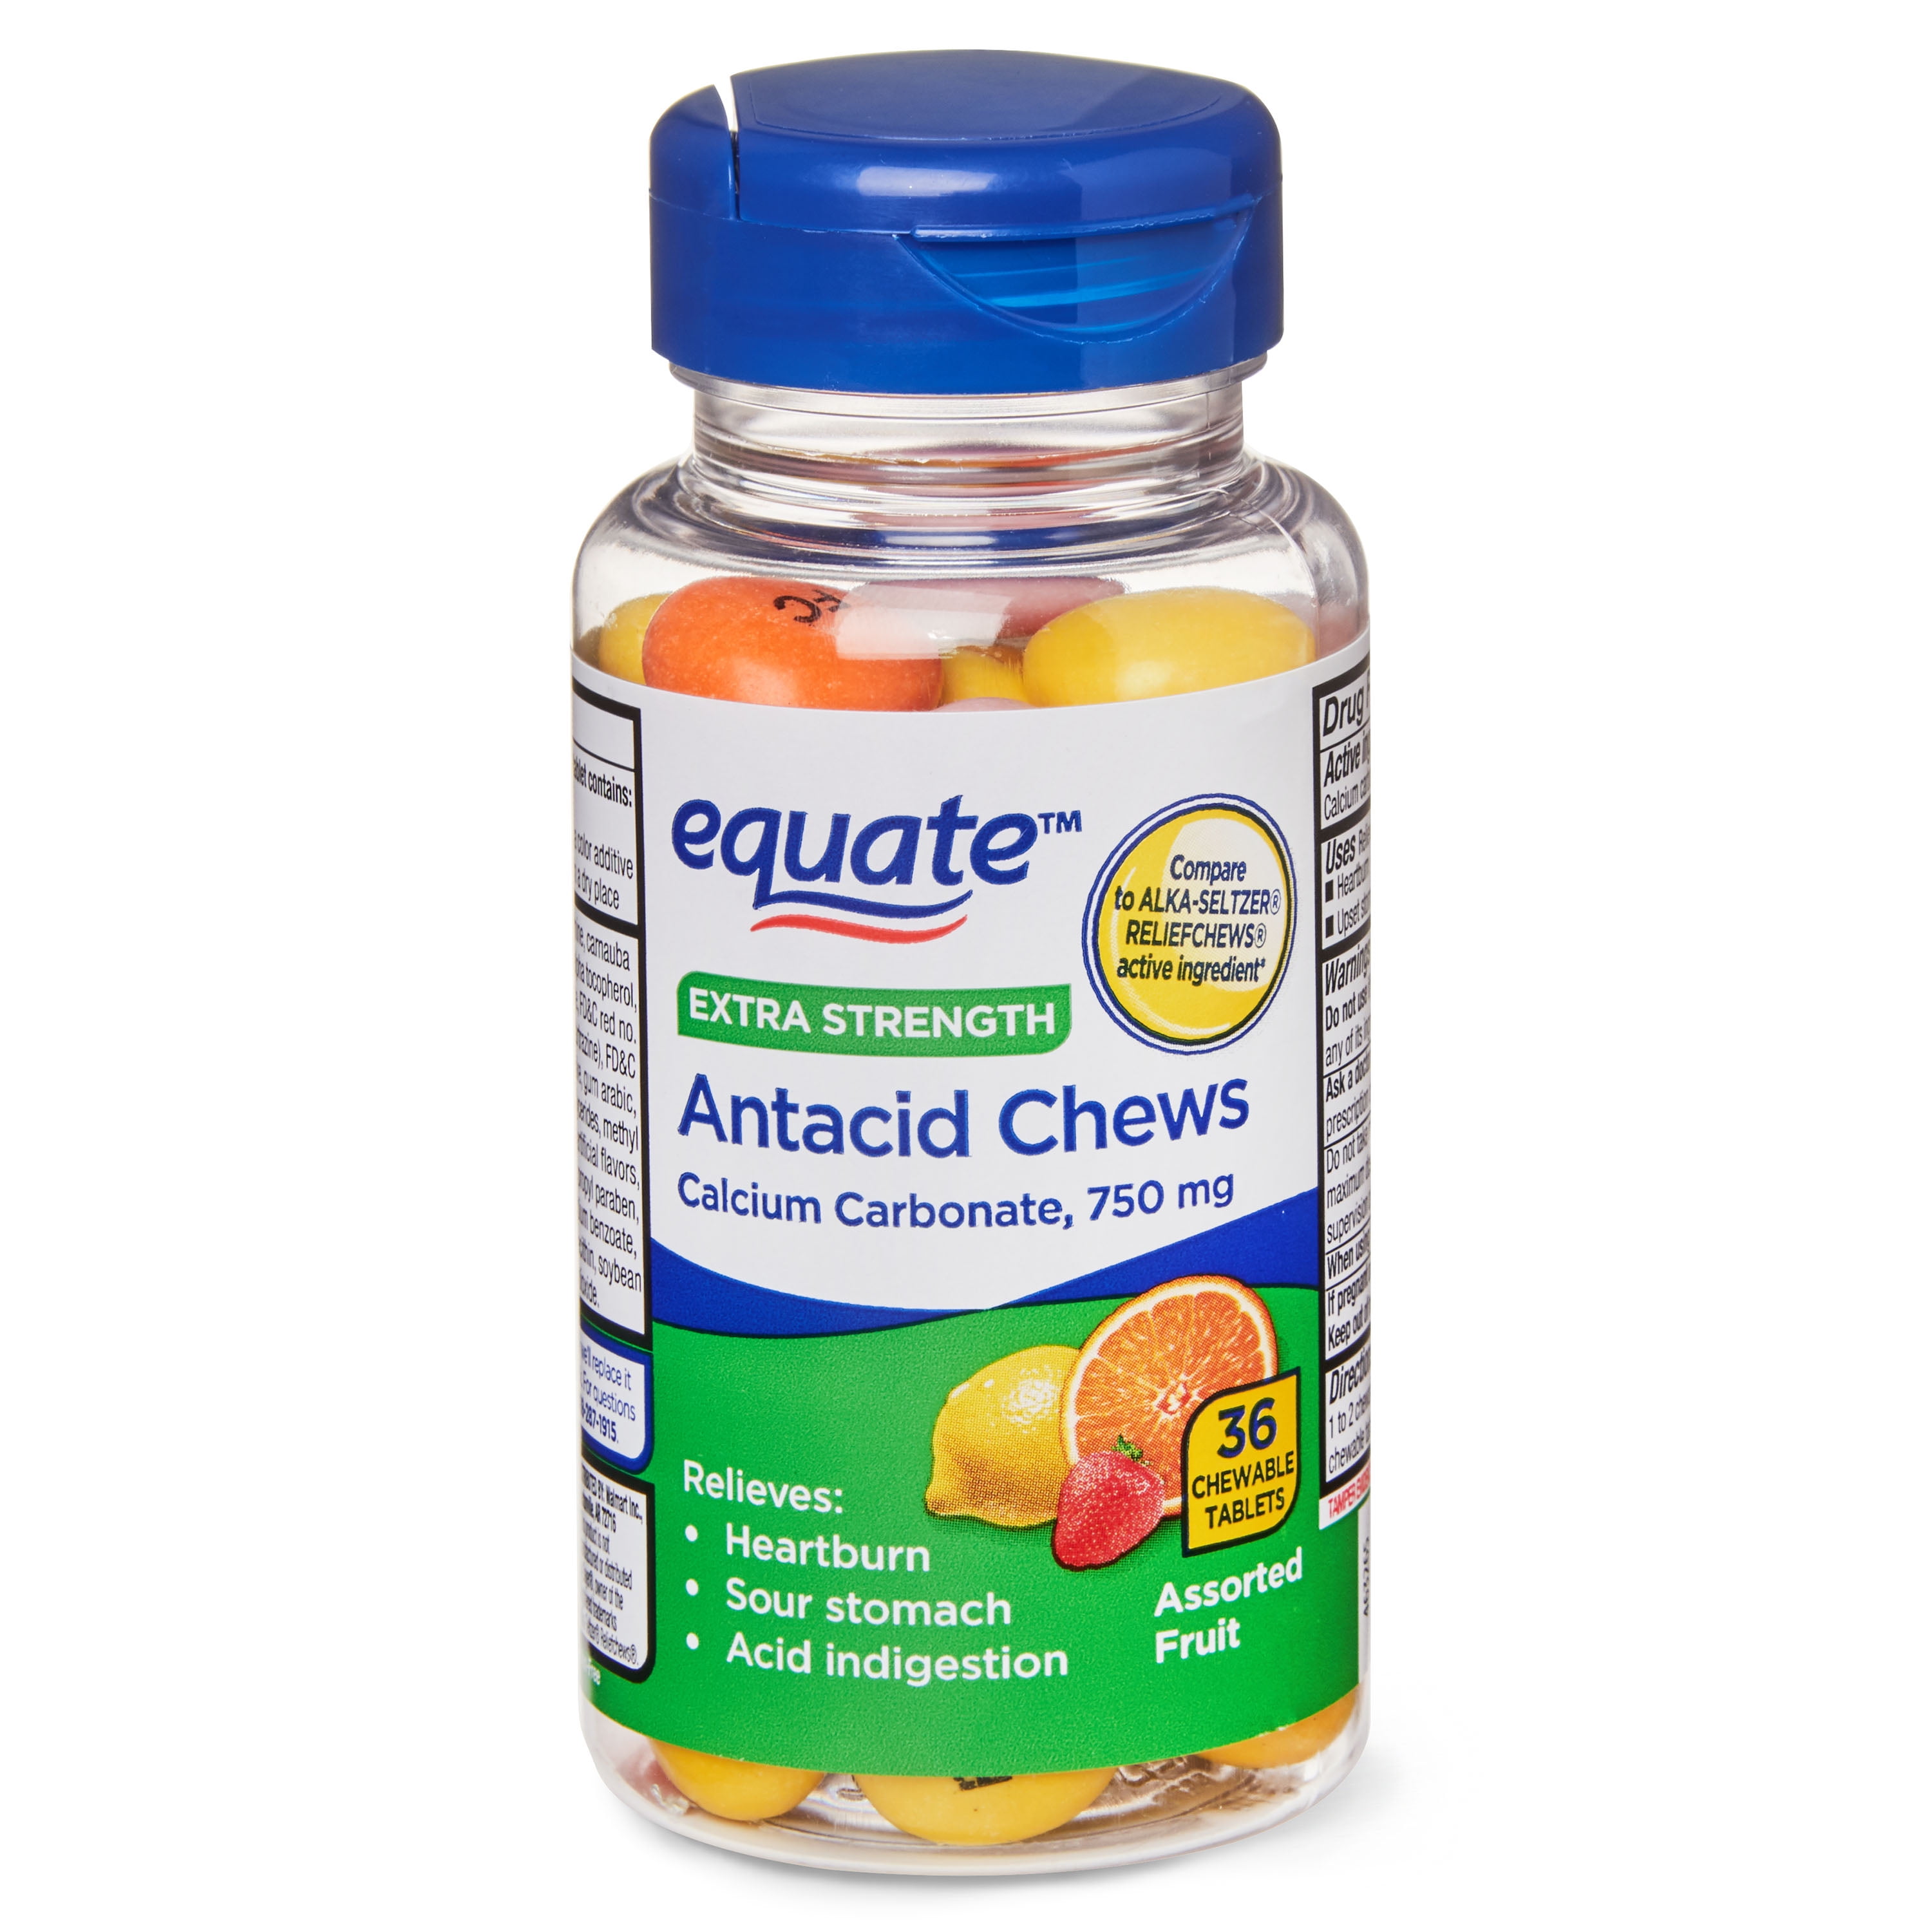 Equate Extra Strength Antacid Chewable Fruit Tablets, 750 mg, 36 Count - Wa...